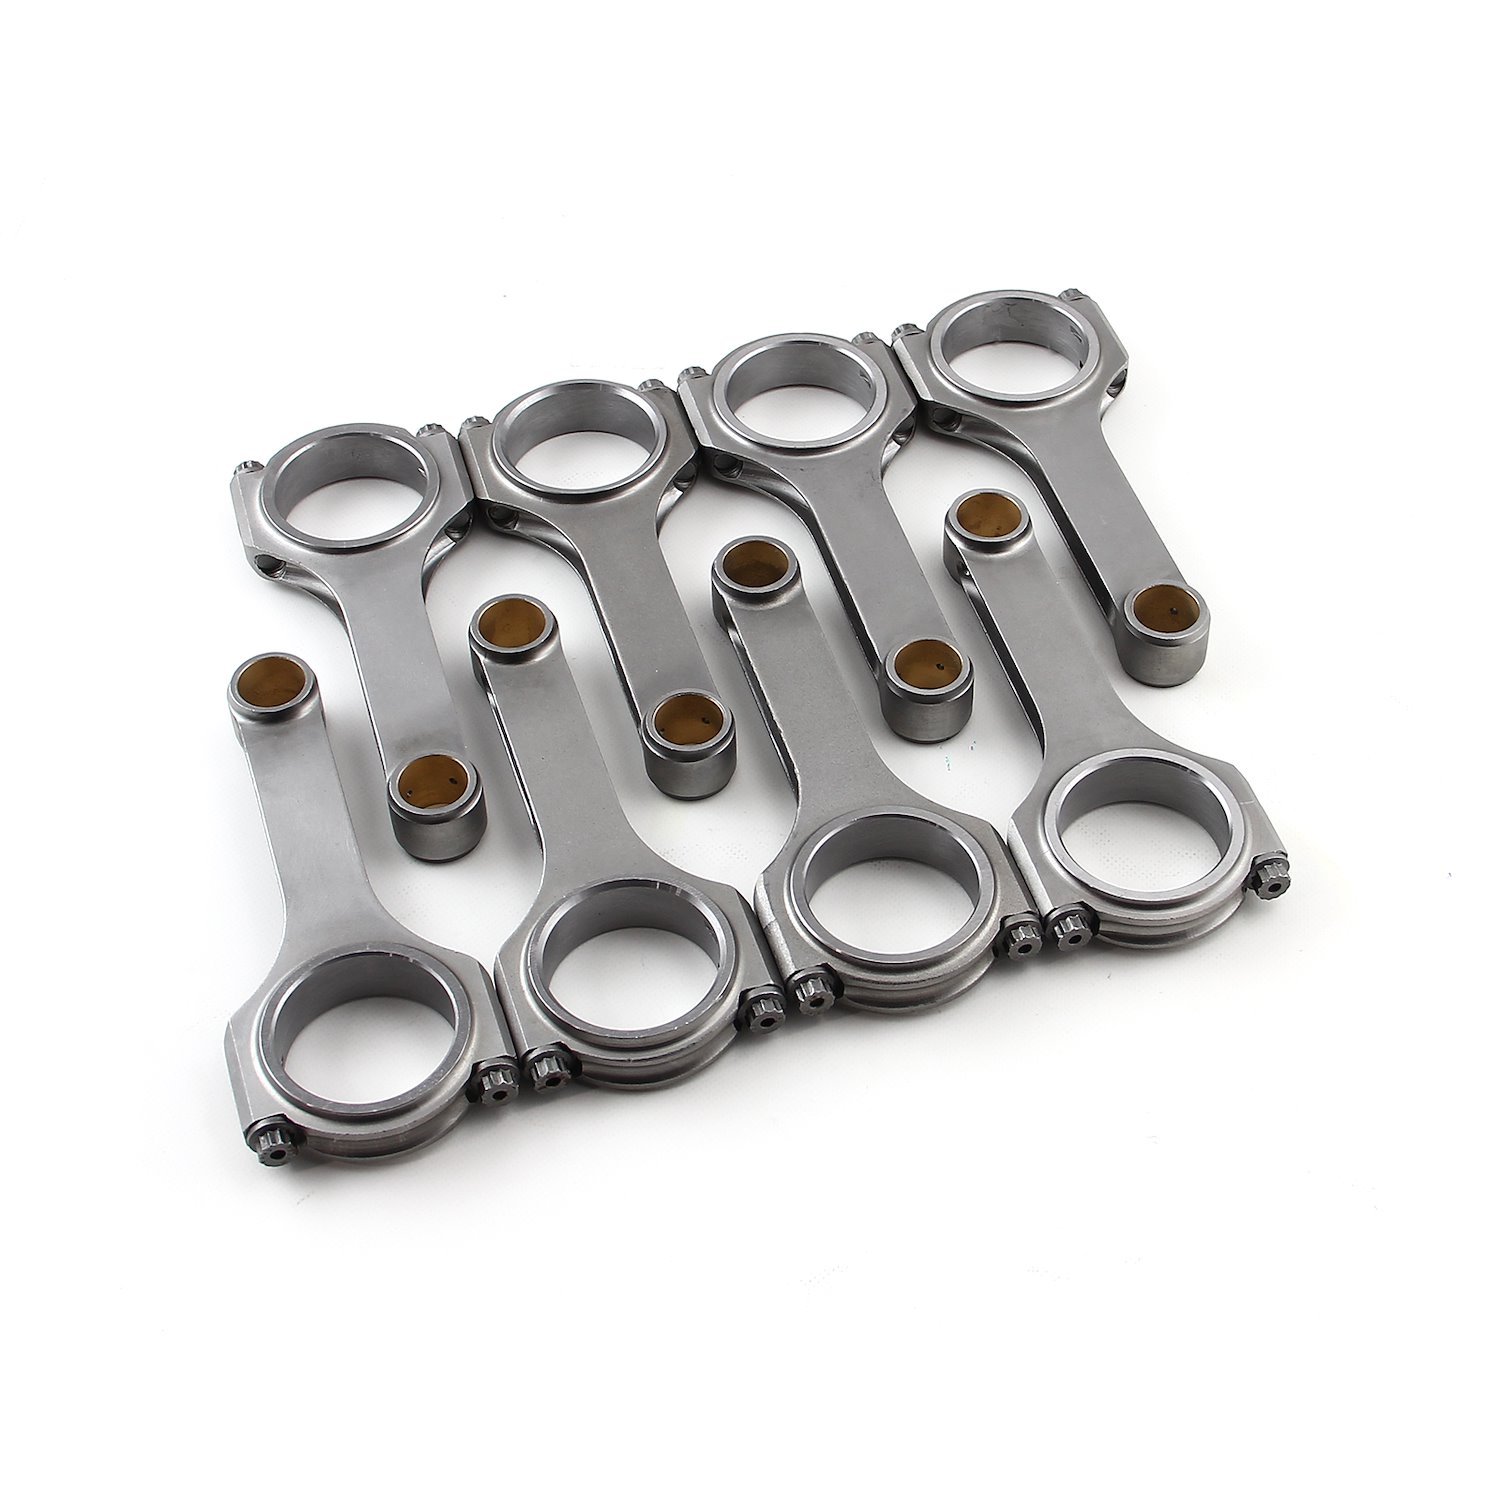 H-Beam Street/Strip Connecting Rods Small Block Chevy 350